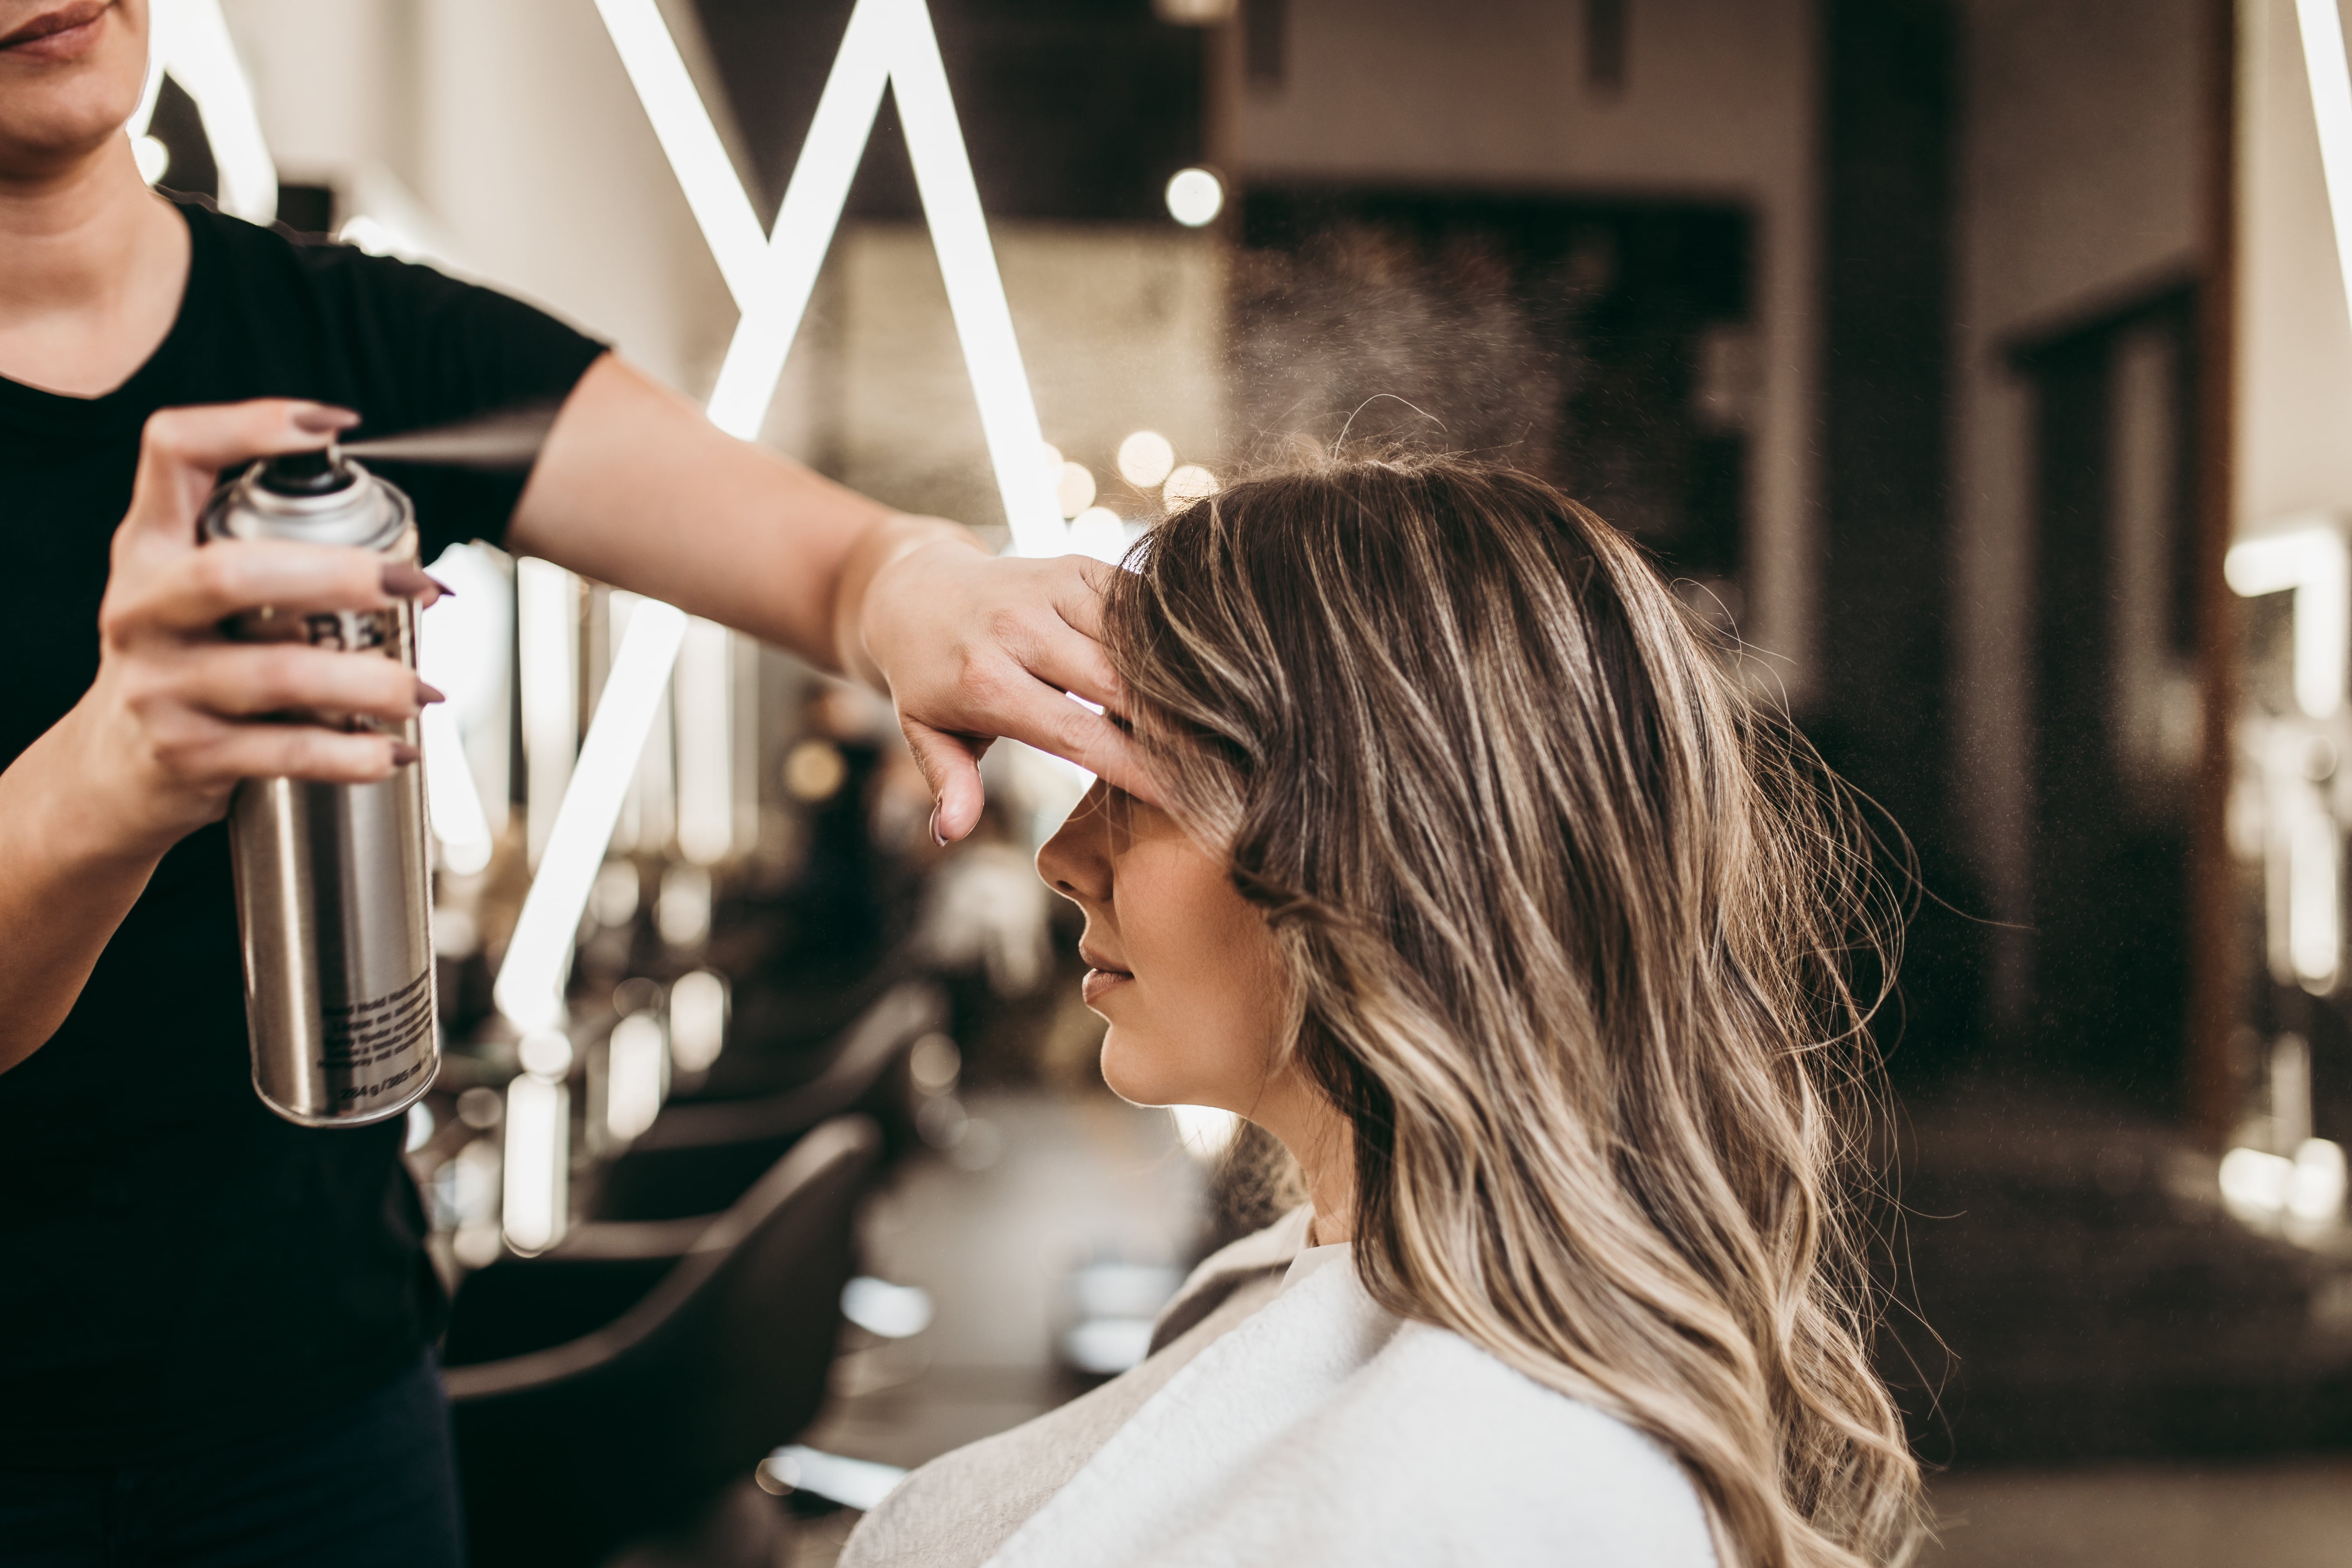 How to Find a New Hair Salon, According to Experts